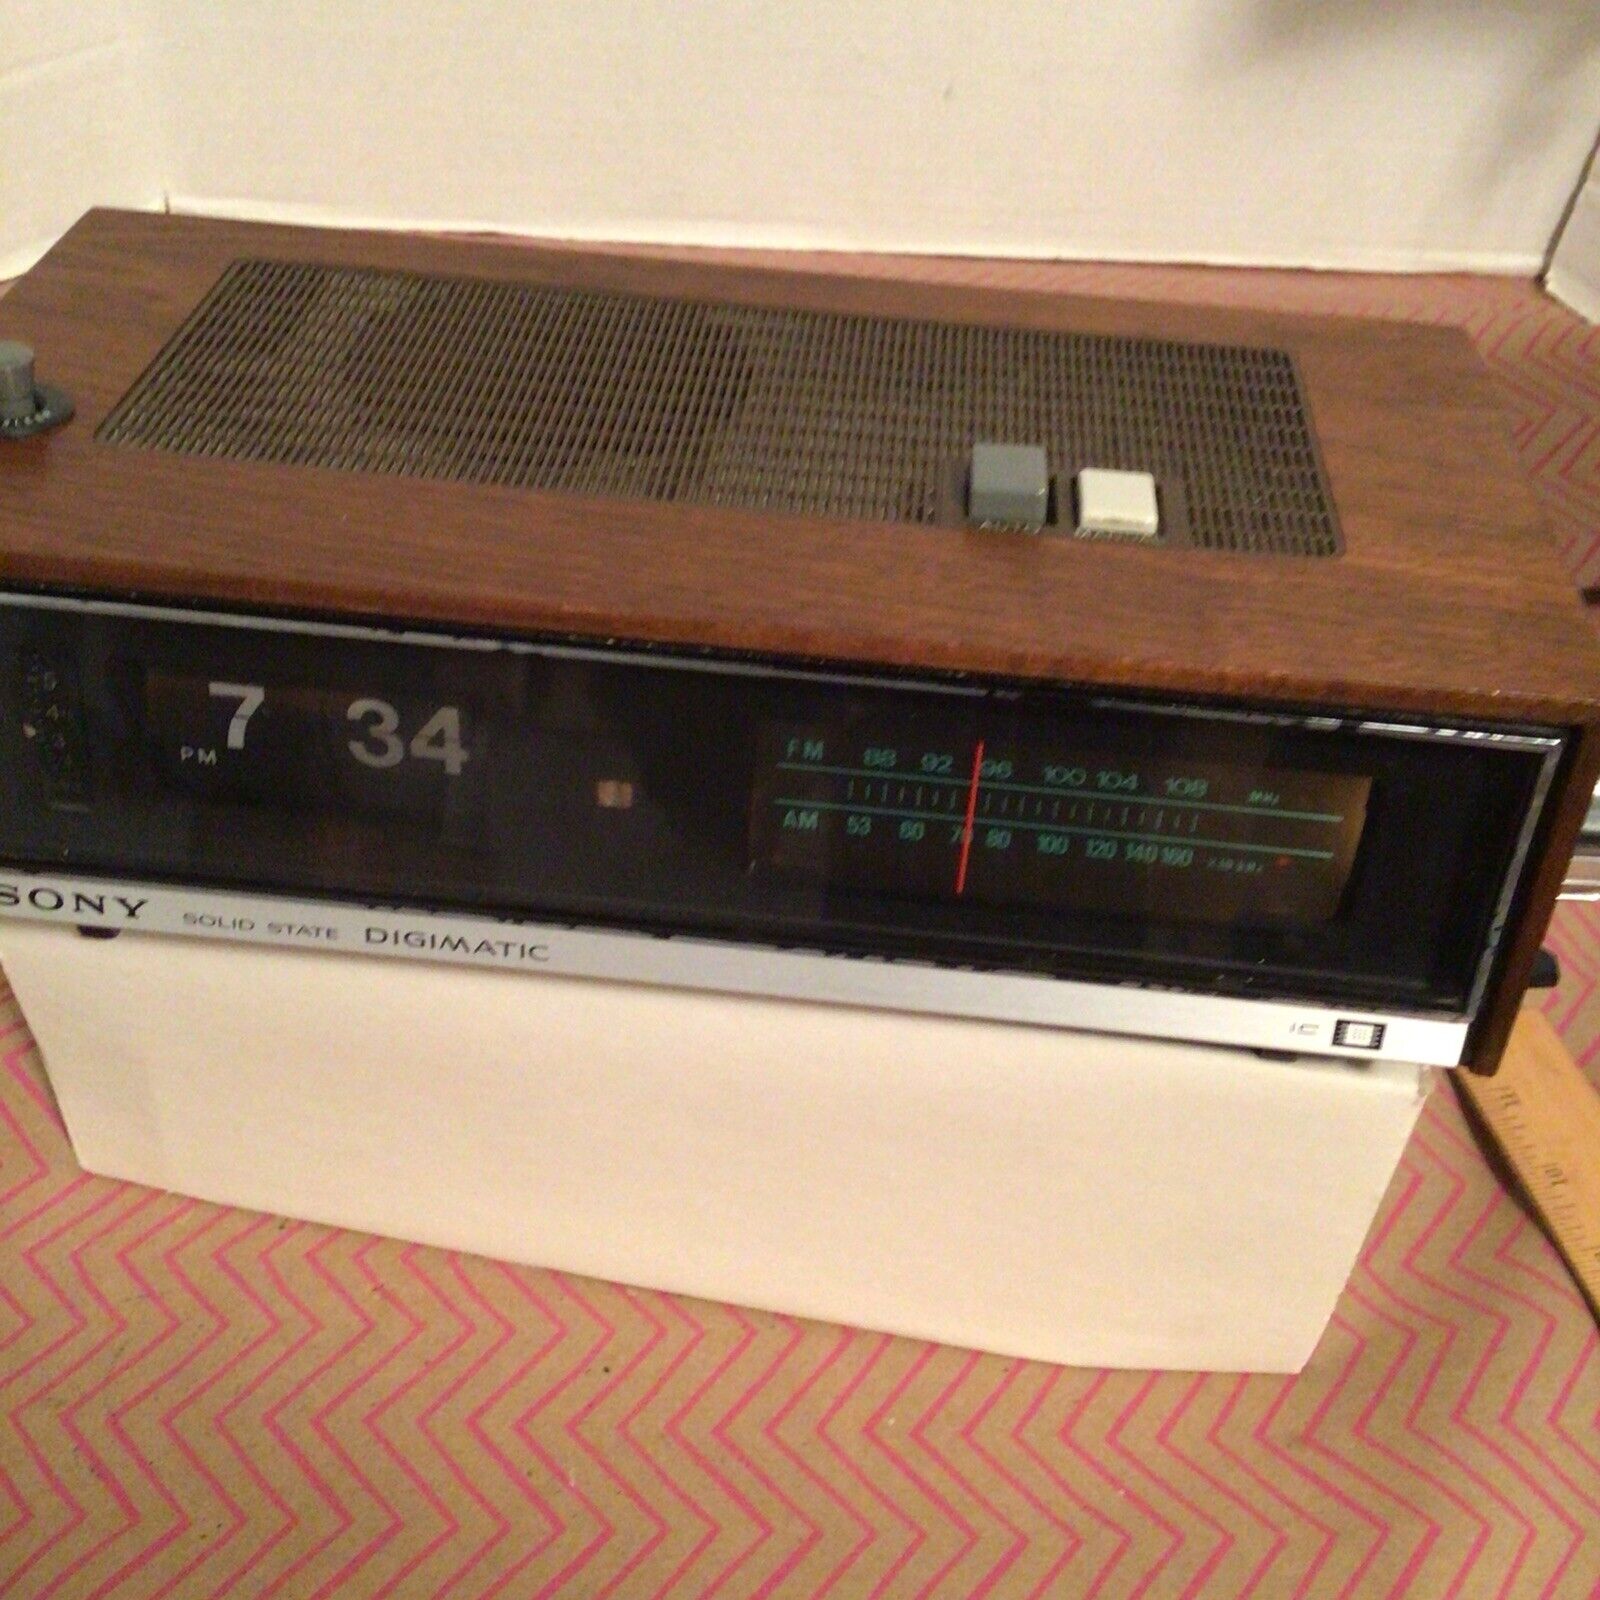 Sony Flip Clock Vintage Radio Wood Eames Works  Back To The Future Groundhog Day